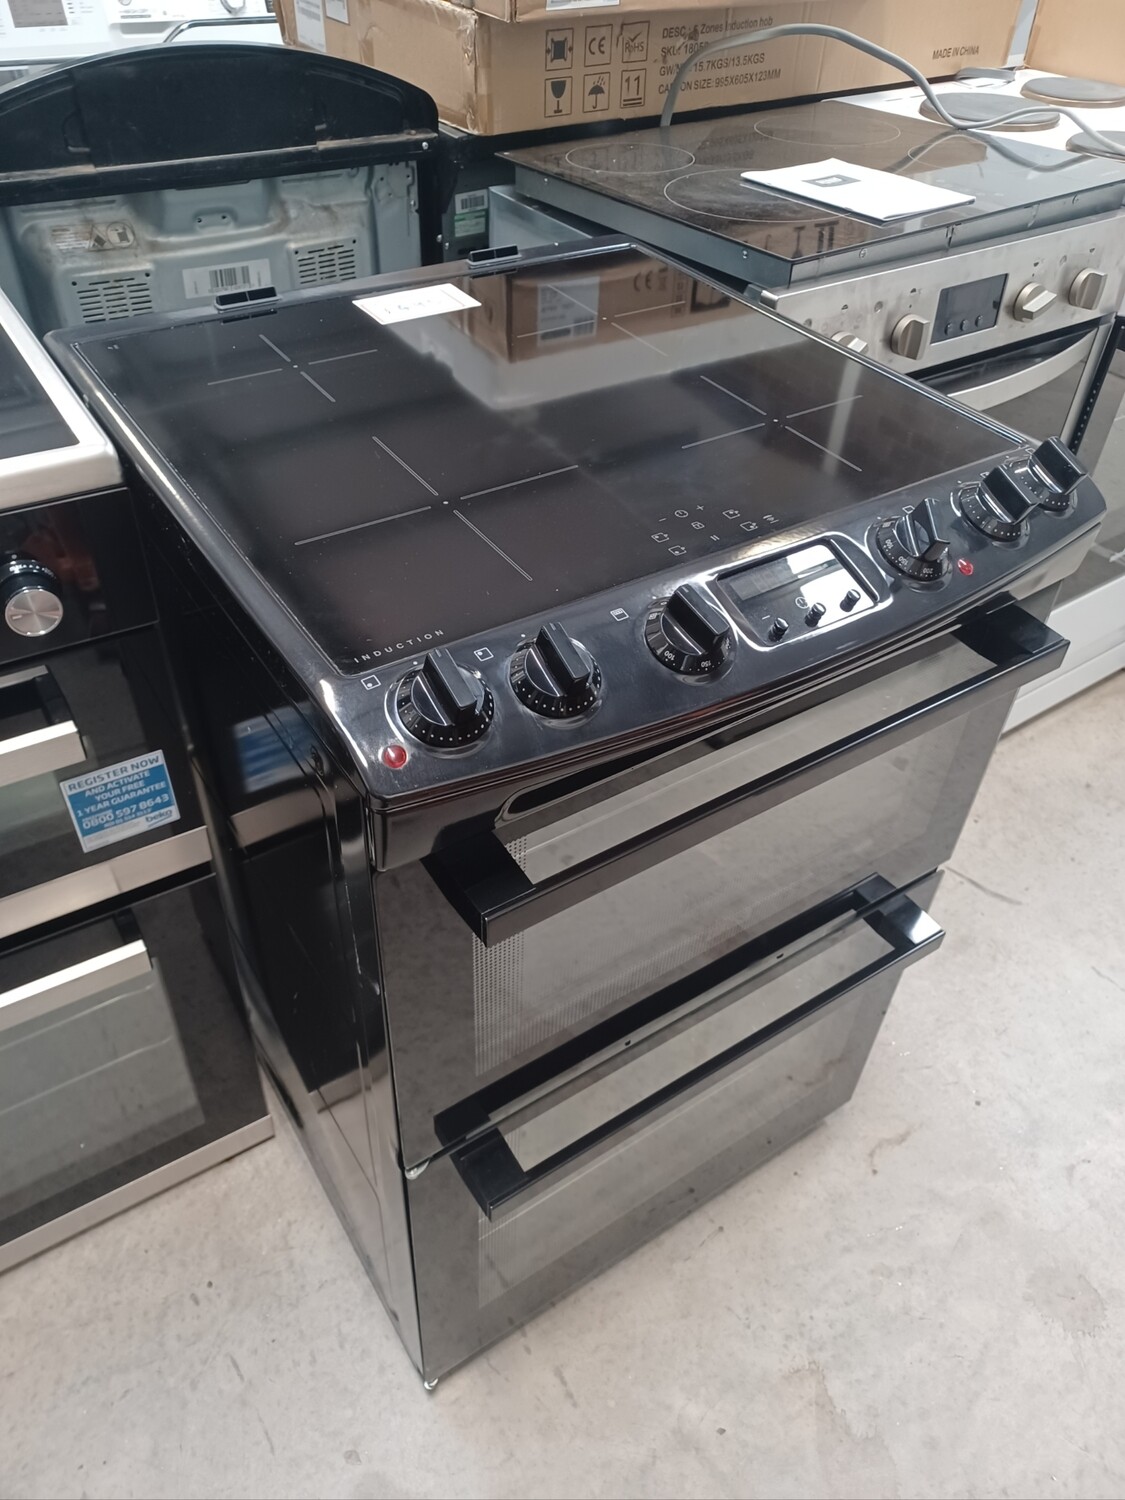 Zanussi Electric Cooker 60cm Double Oven INDUCTION Hobs Black New Graded H90 x W60 x D60 cm PLEASE NOTE.  Will only work with induction hob compatible pans